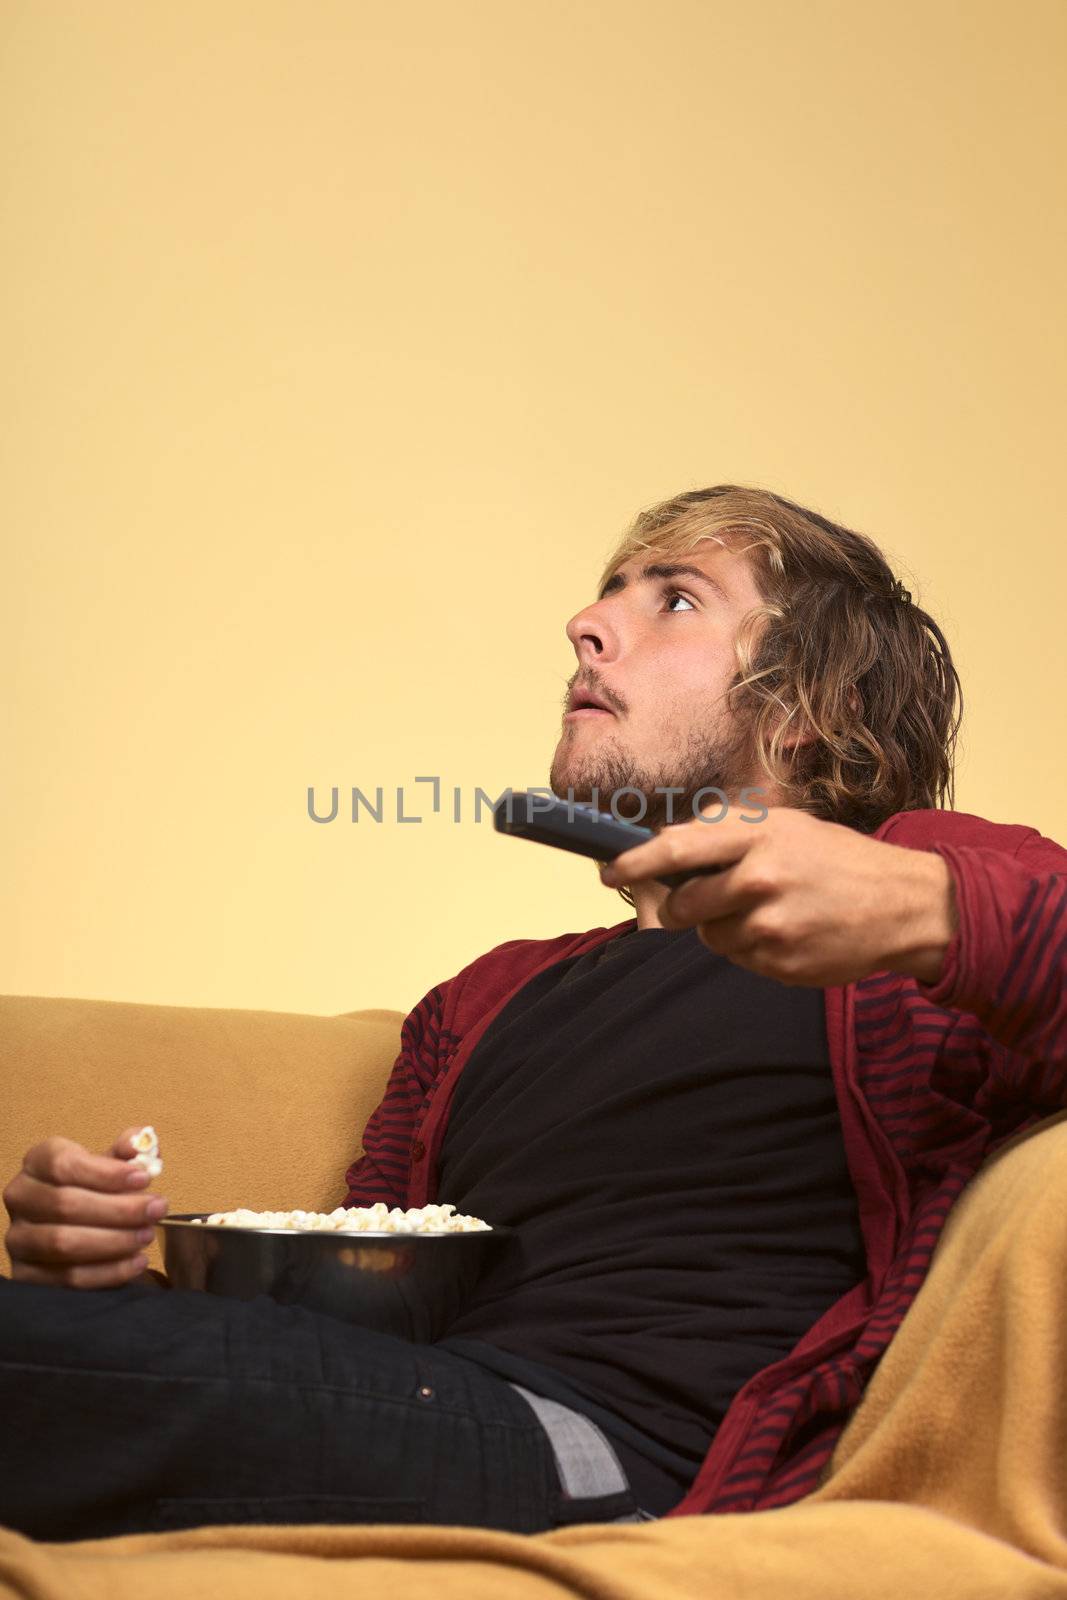 Young man watching TV holding a remote control in one hand and eating popcorn (Selective Focus, Focus on the left eye)